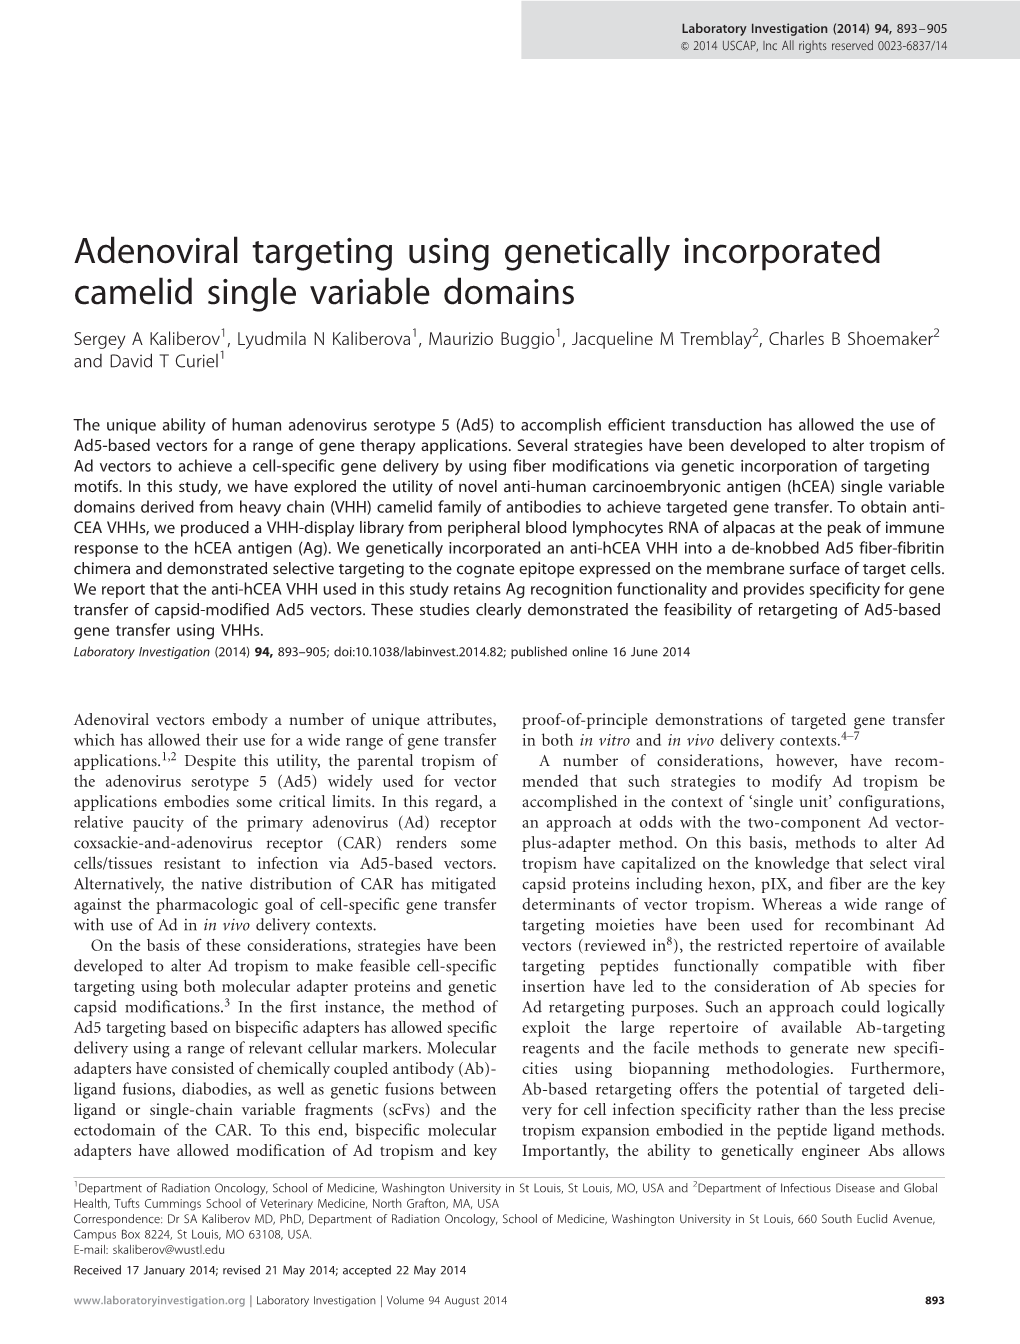 Adenoviral Targeting Using Genetically Incorporated Camelid Single